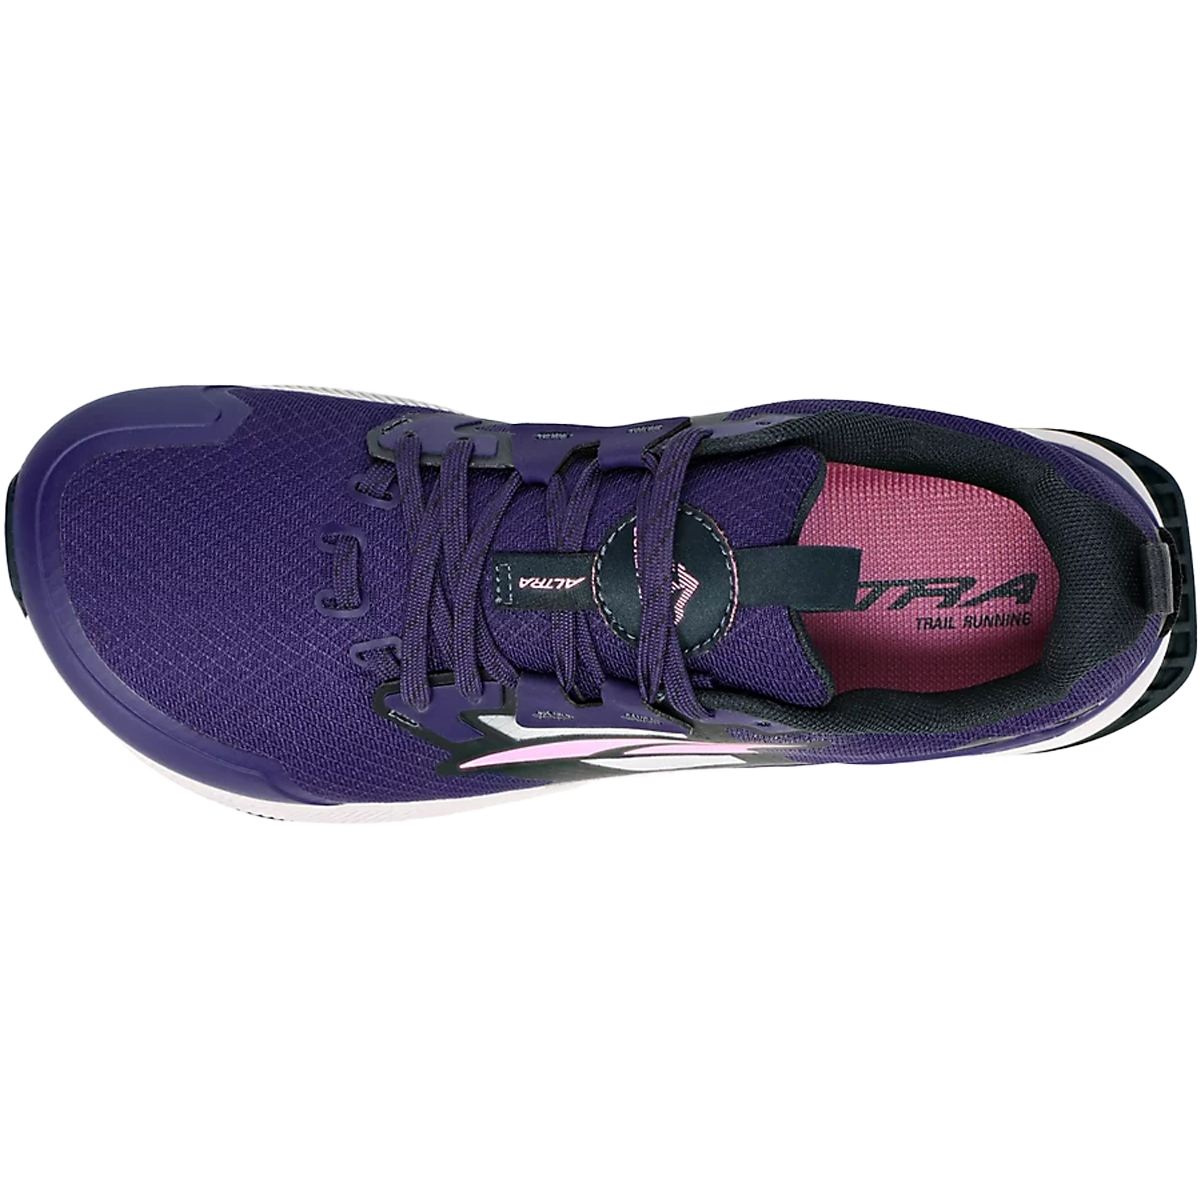 Altra Lone Peak 7 - Trail running shoes Women's, Free EU Delivery